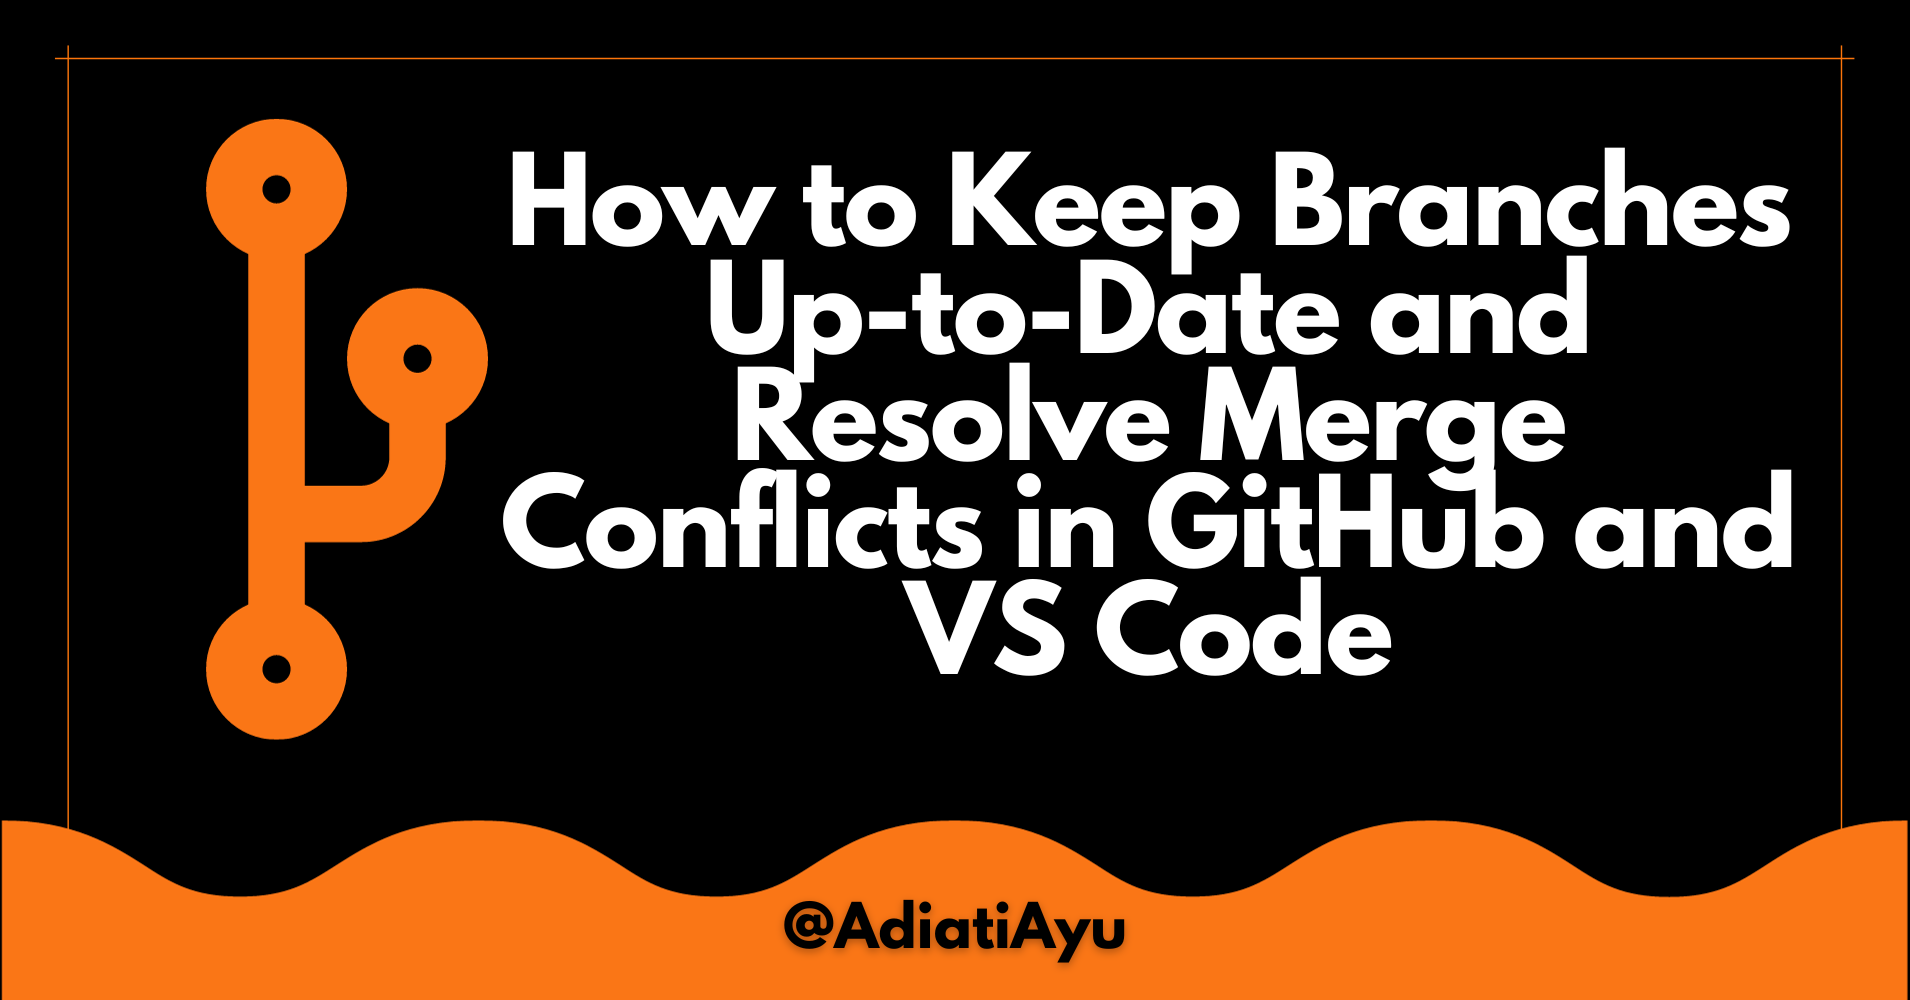 Image for How to Keep Branches Up-to-Date and Resolve Merge Conflicts in GitHub and VS Code